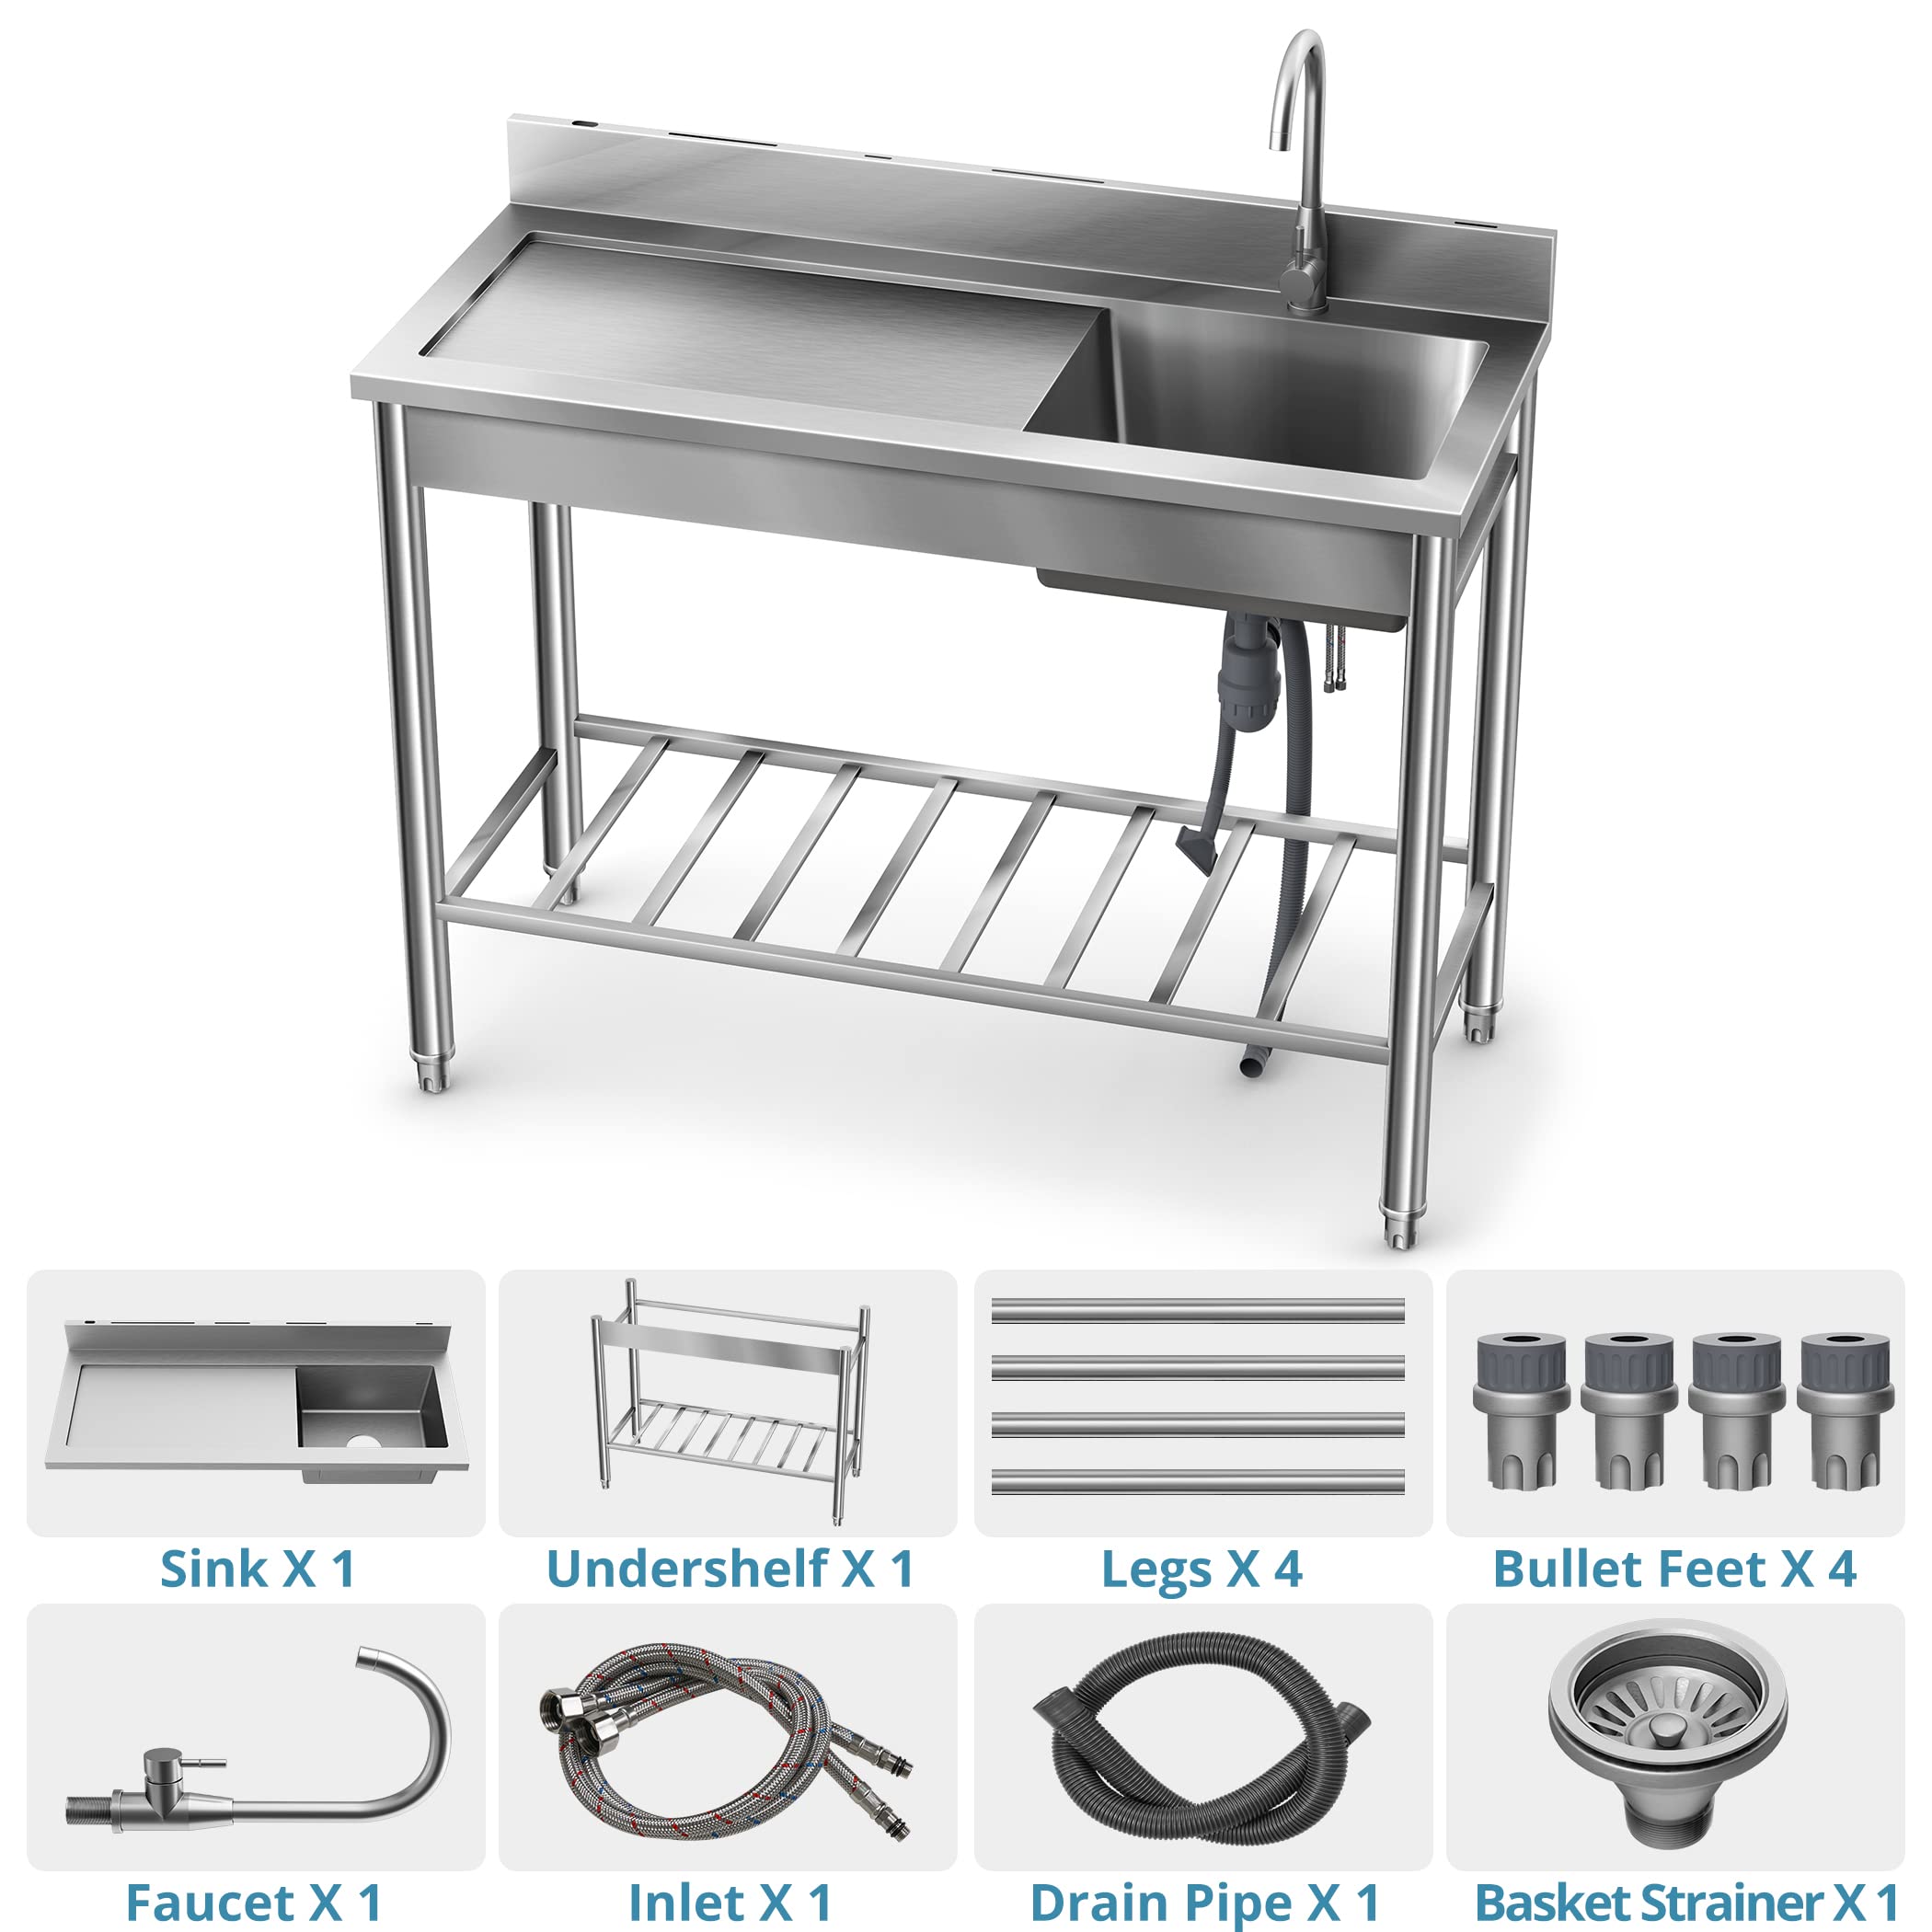 Lafati 304 SUS Stainless Steel Utility Sink - 47-Inch Free Standing Single Bowl Sink with Cold & Hot Water Faucet and Undershelf